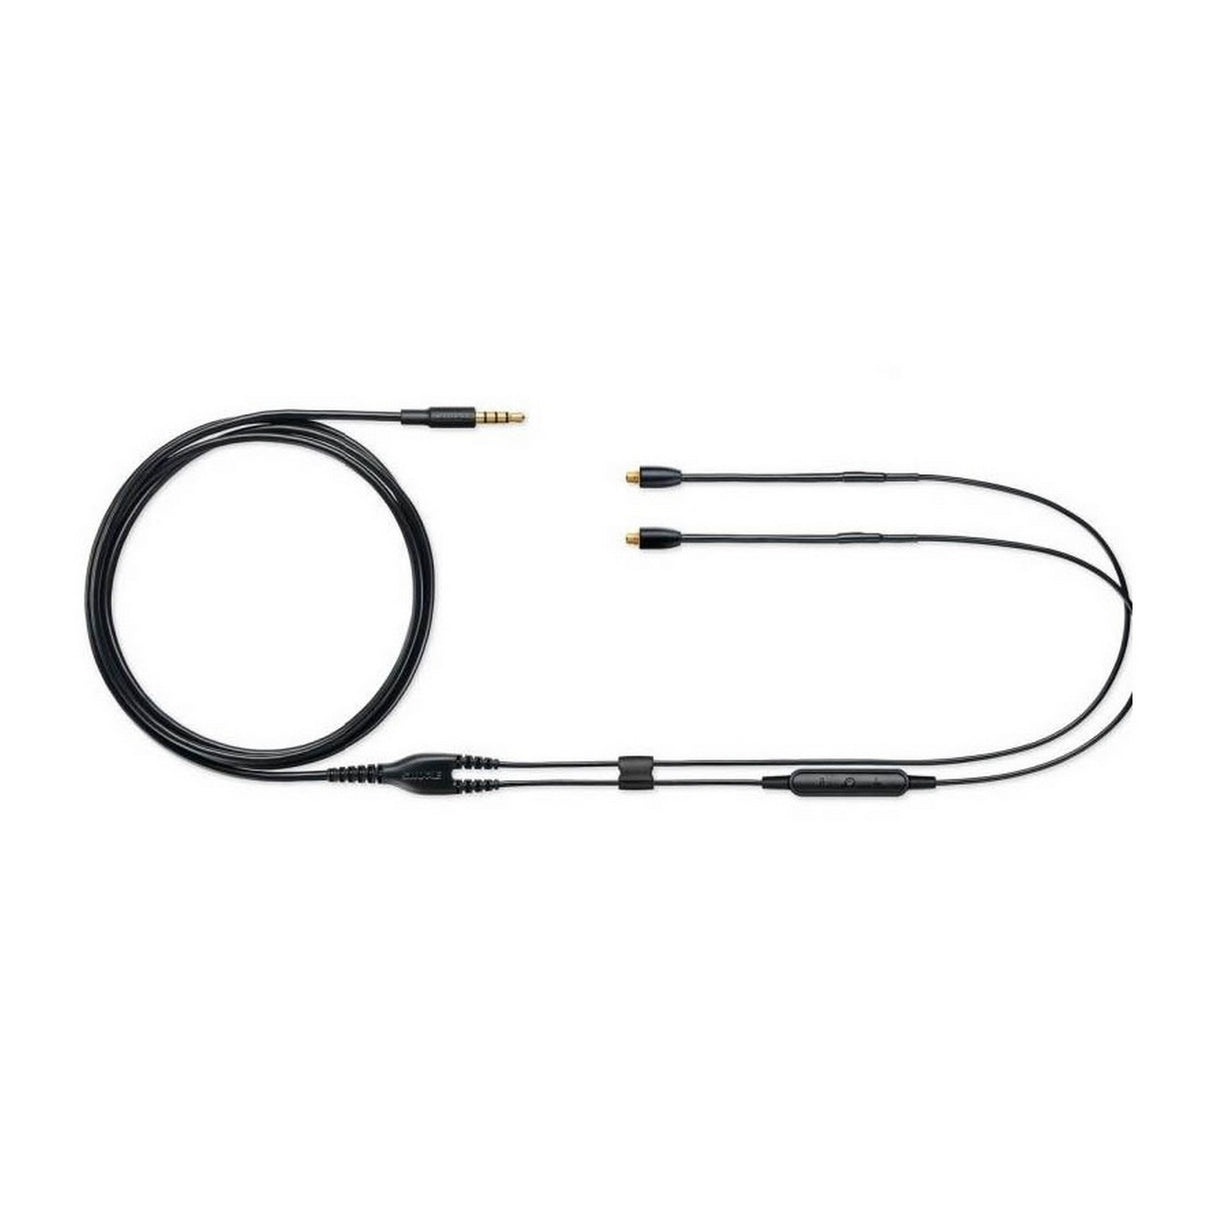 Shure RMCE 4-Pin Mini-Jack Plug Earphone Cable with Remote/Microphone for SE Series